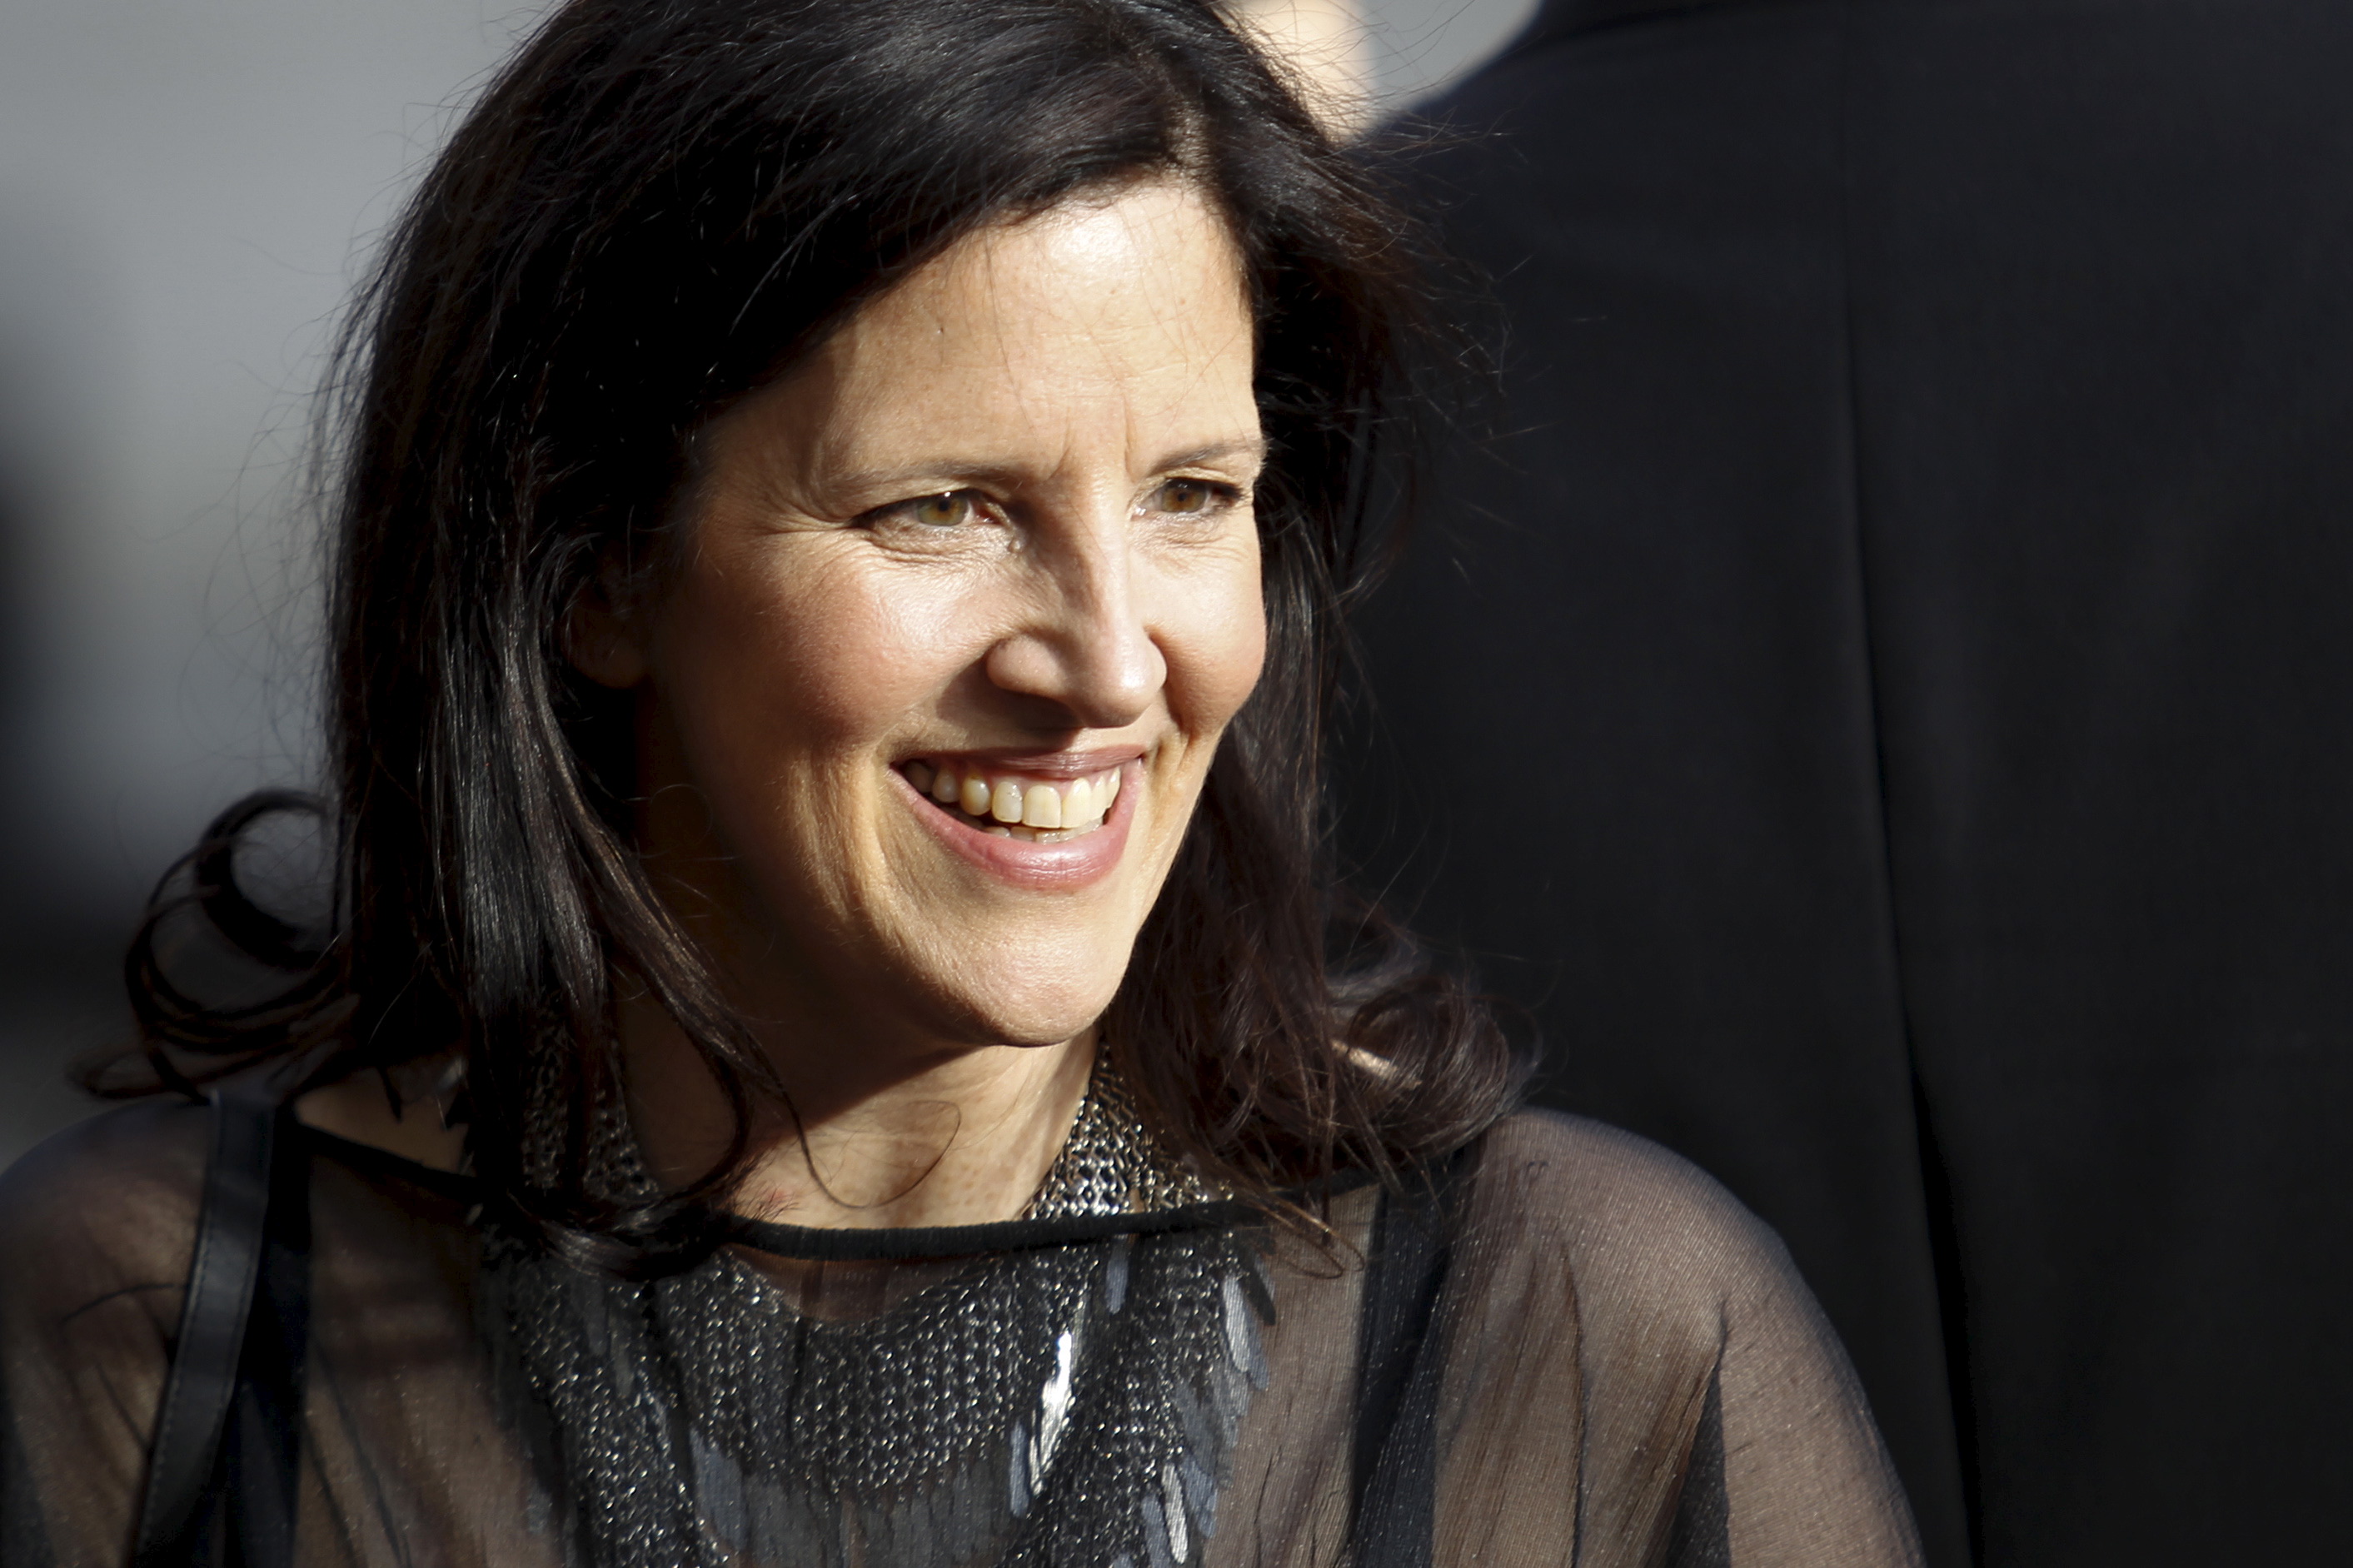 Director Laura Poitras arrives to attend the Chaplin award at Alice Tully Hall in New York April 27, 2015. (Eduardo Munoz—Reuters)